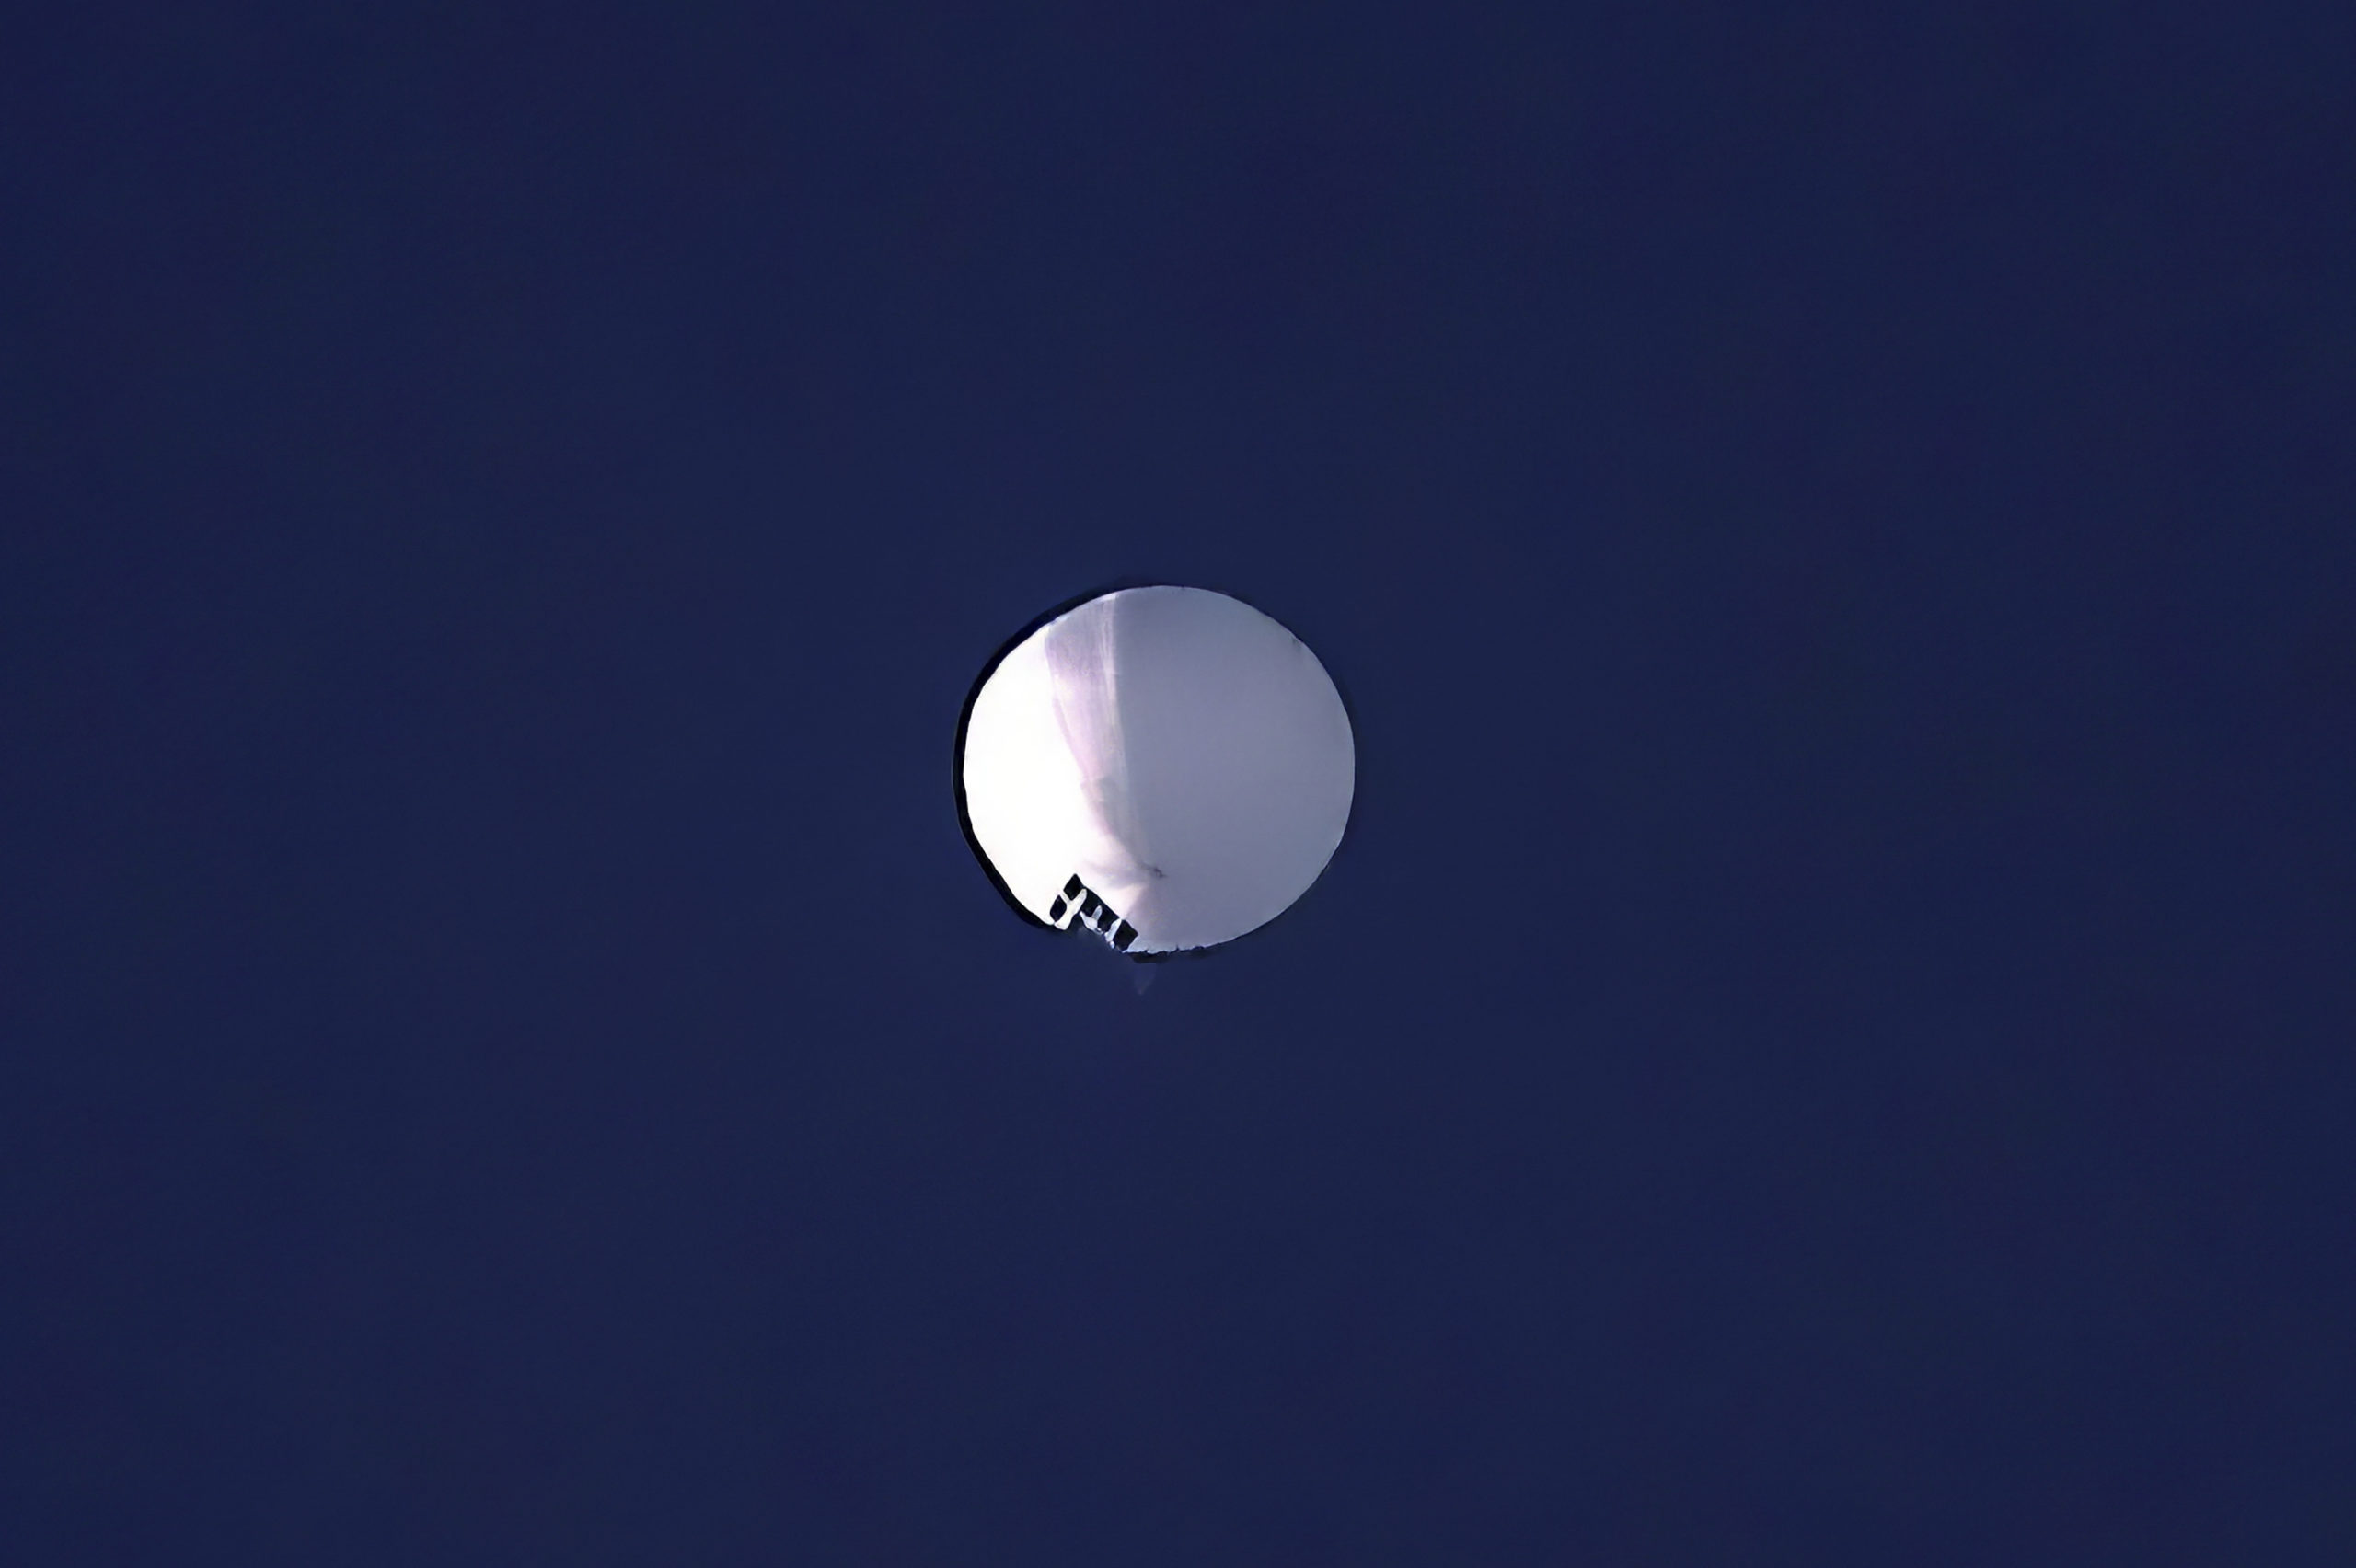 A high altitude balloon floats over Billings, Mont., on Wednesday, Feb. 1, 2023. The huge, high-alt...